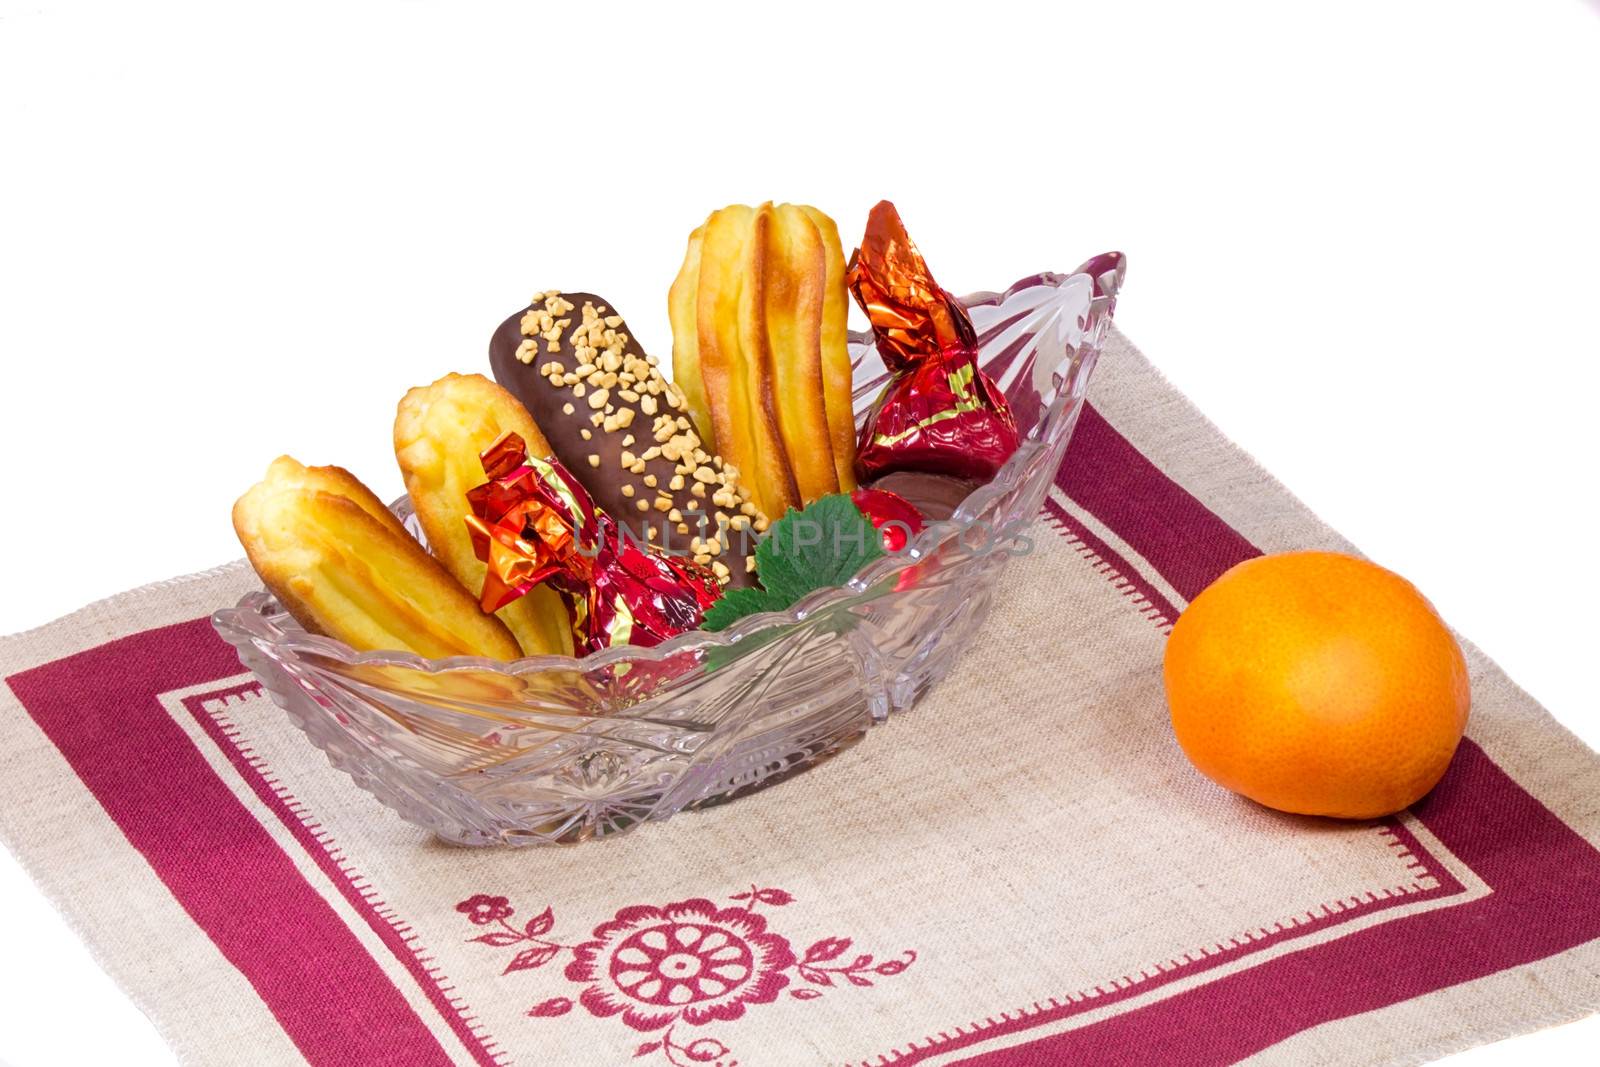 Crystal vase filled with cakes, sweets, Mandarin. Located on a napkin from flax. Presented on a white background..